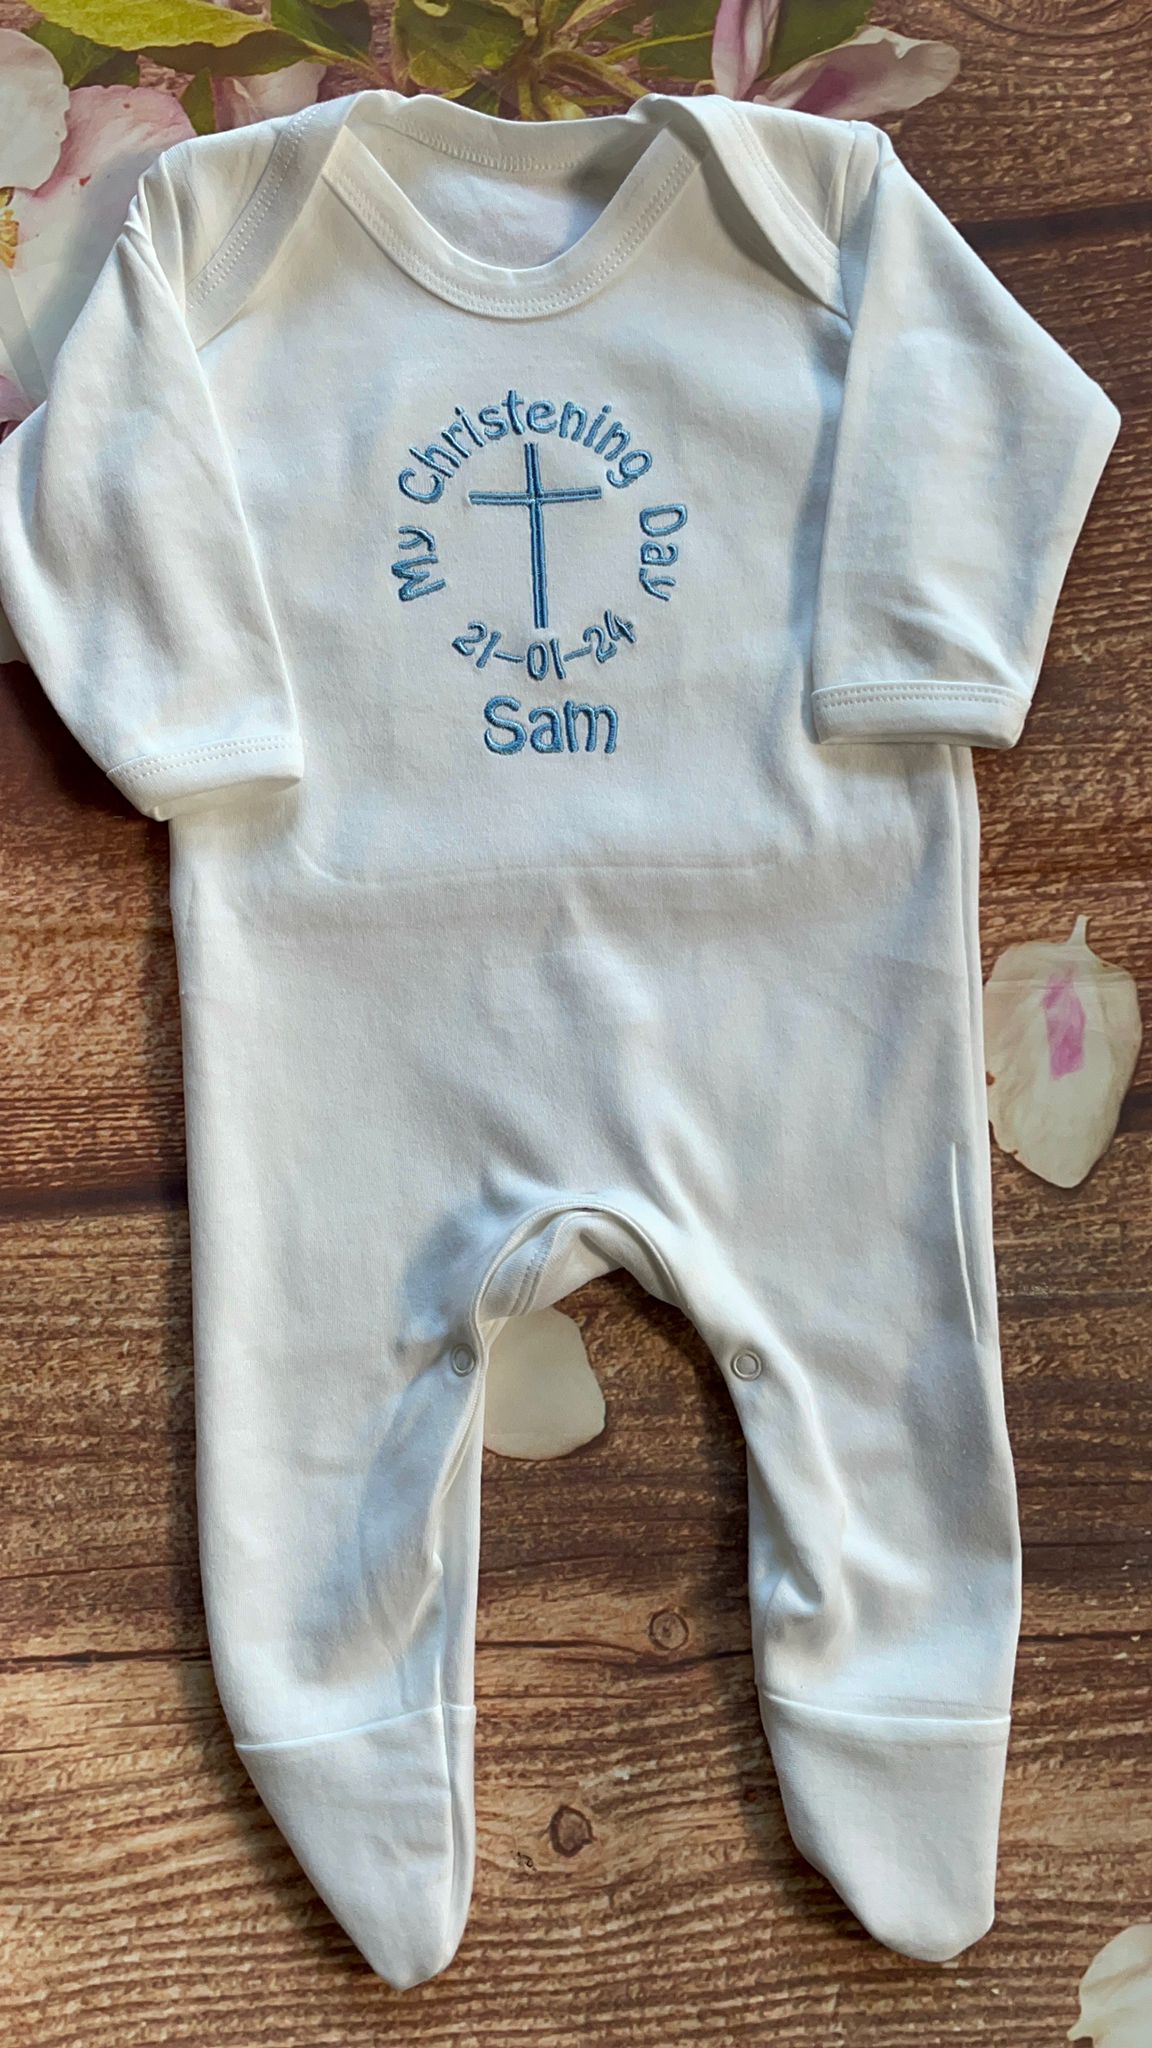 Christening / Baptism outfit